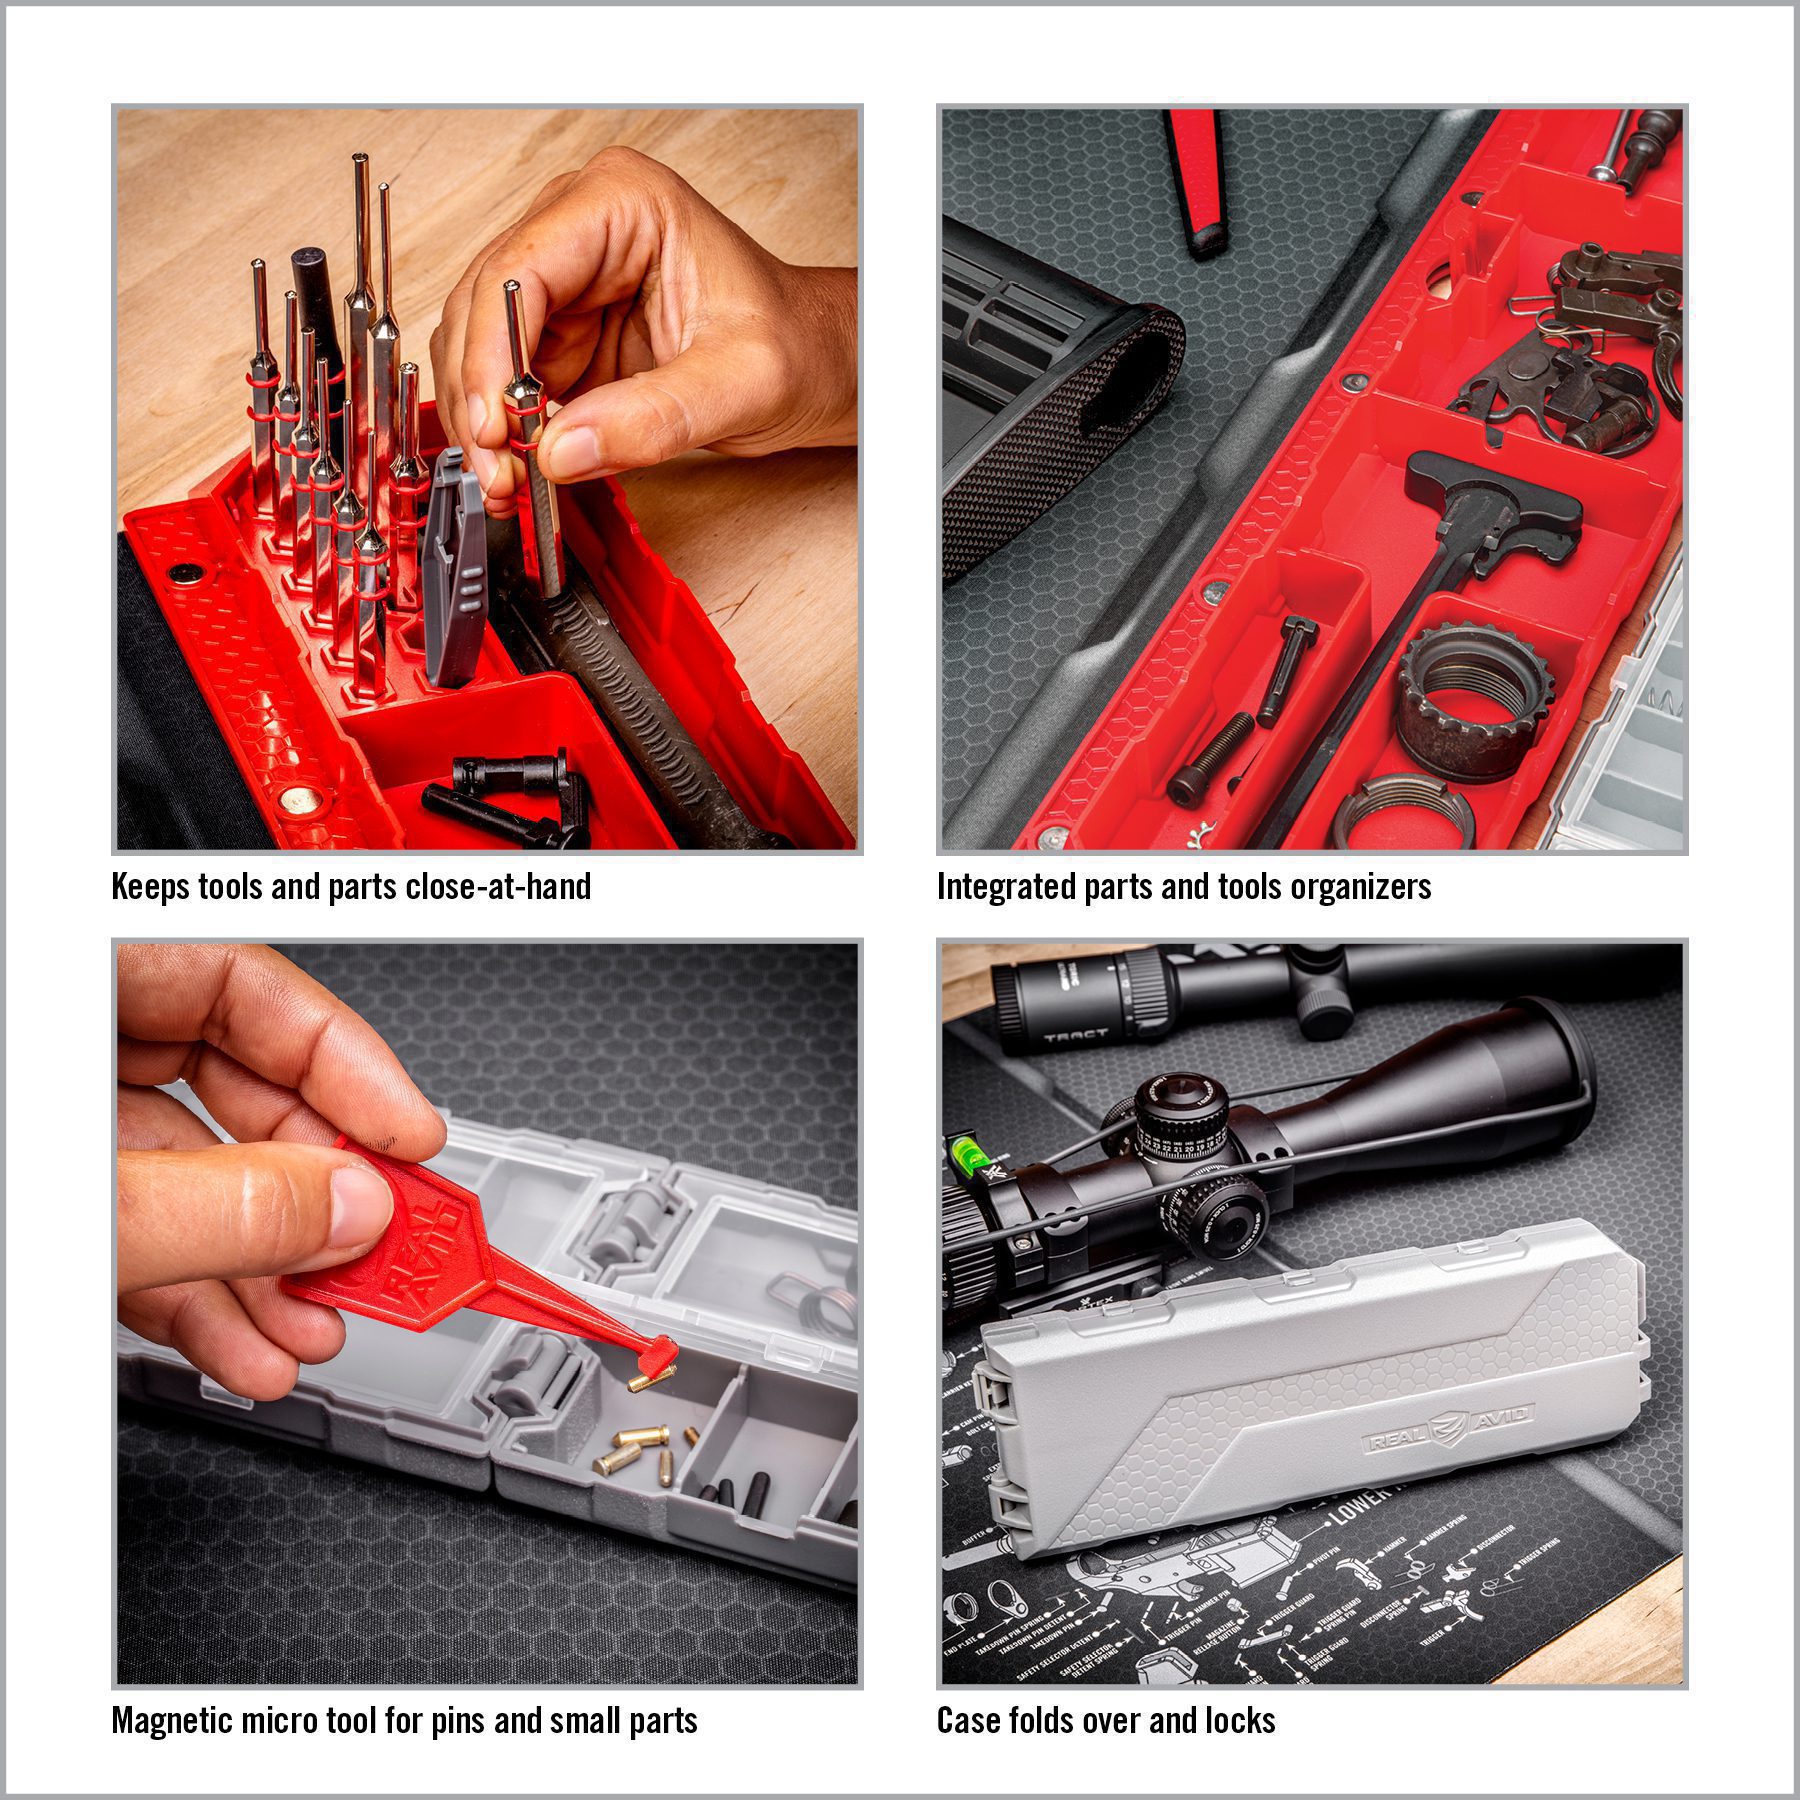 the instructions for how to set up a toolbox